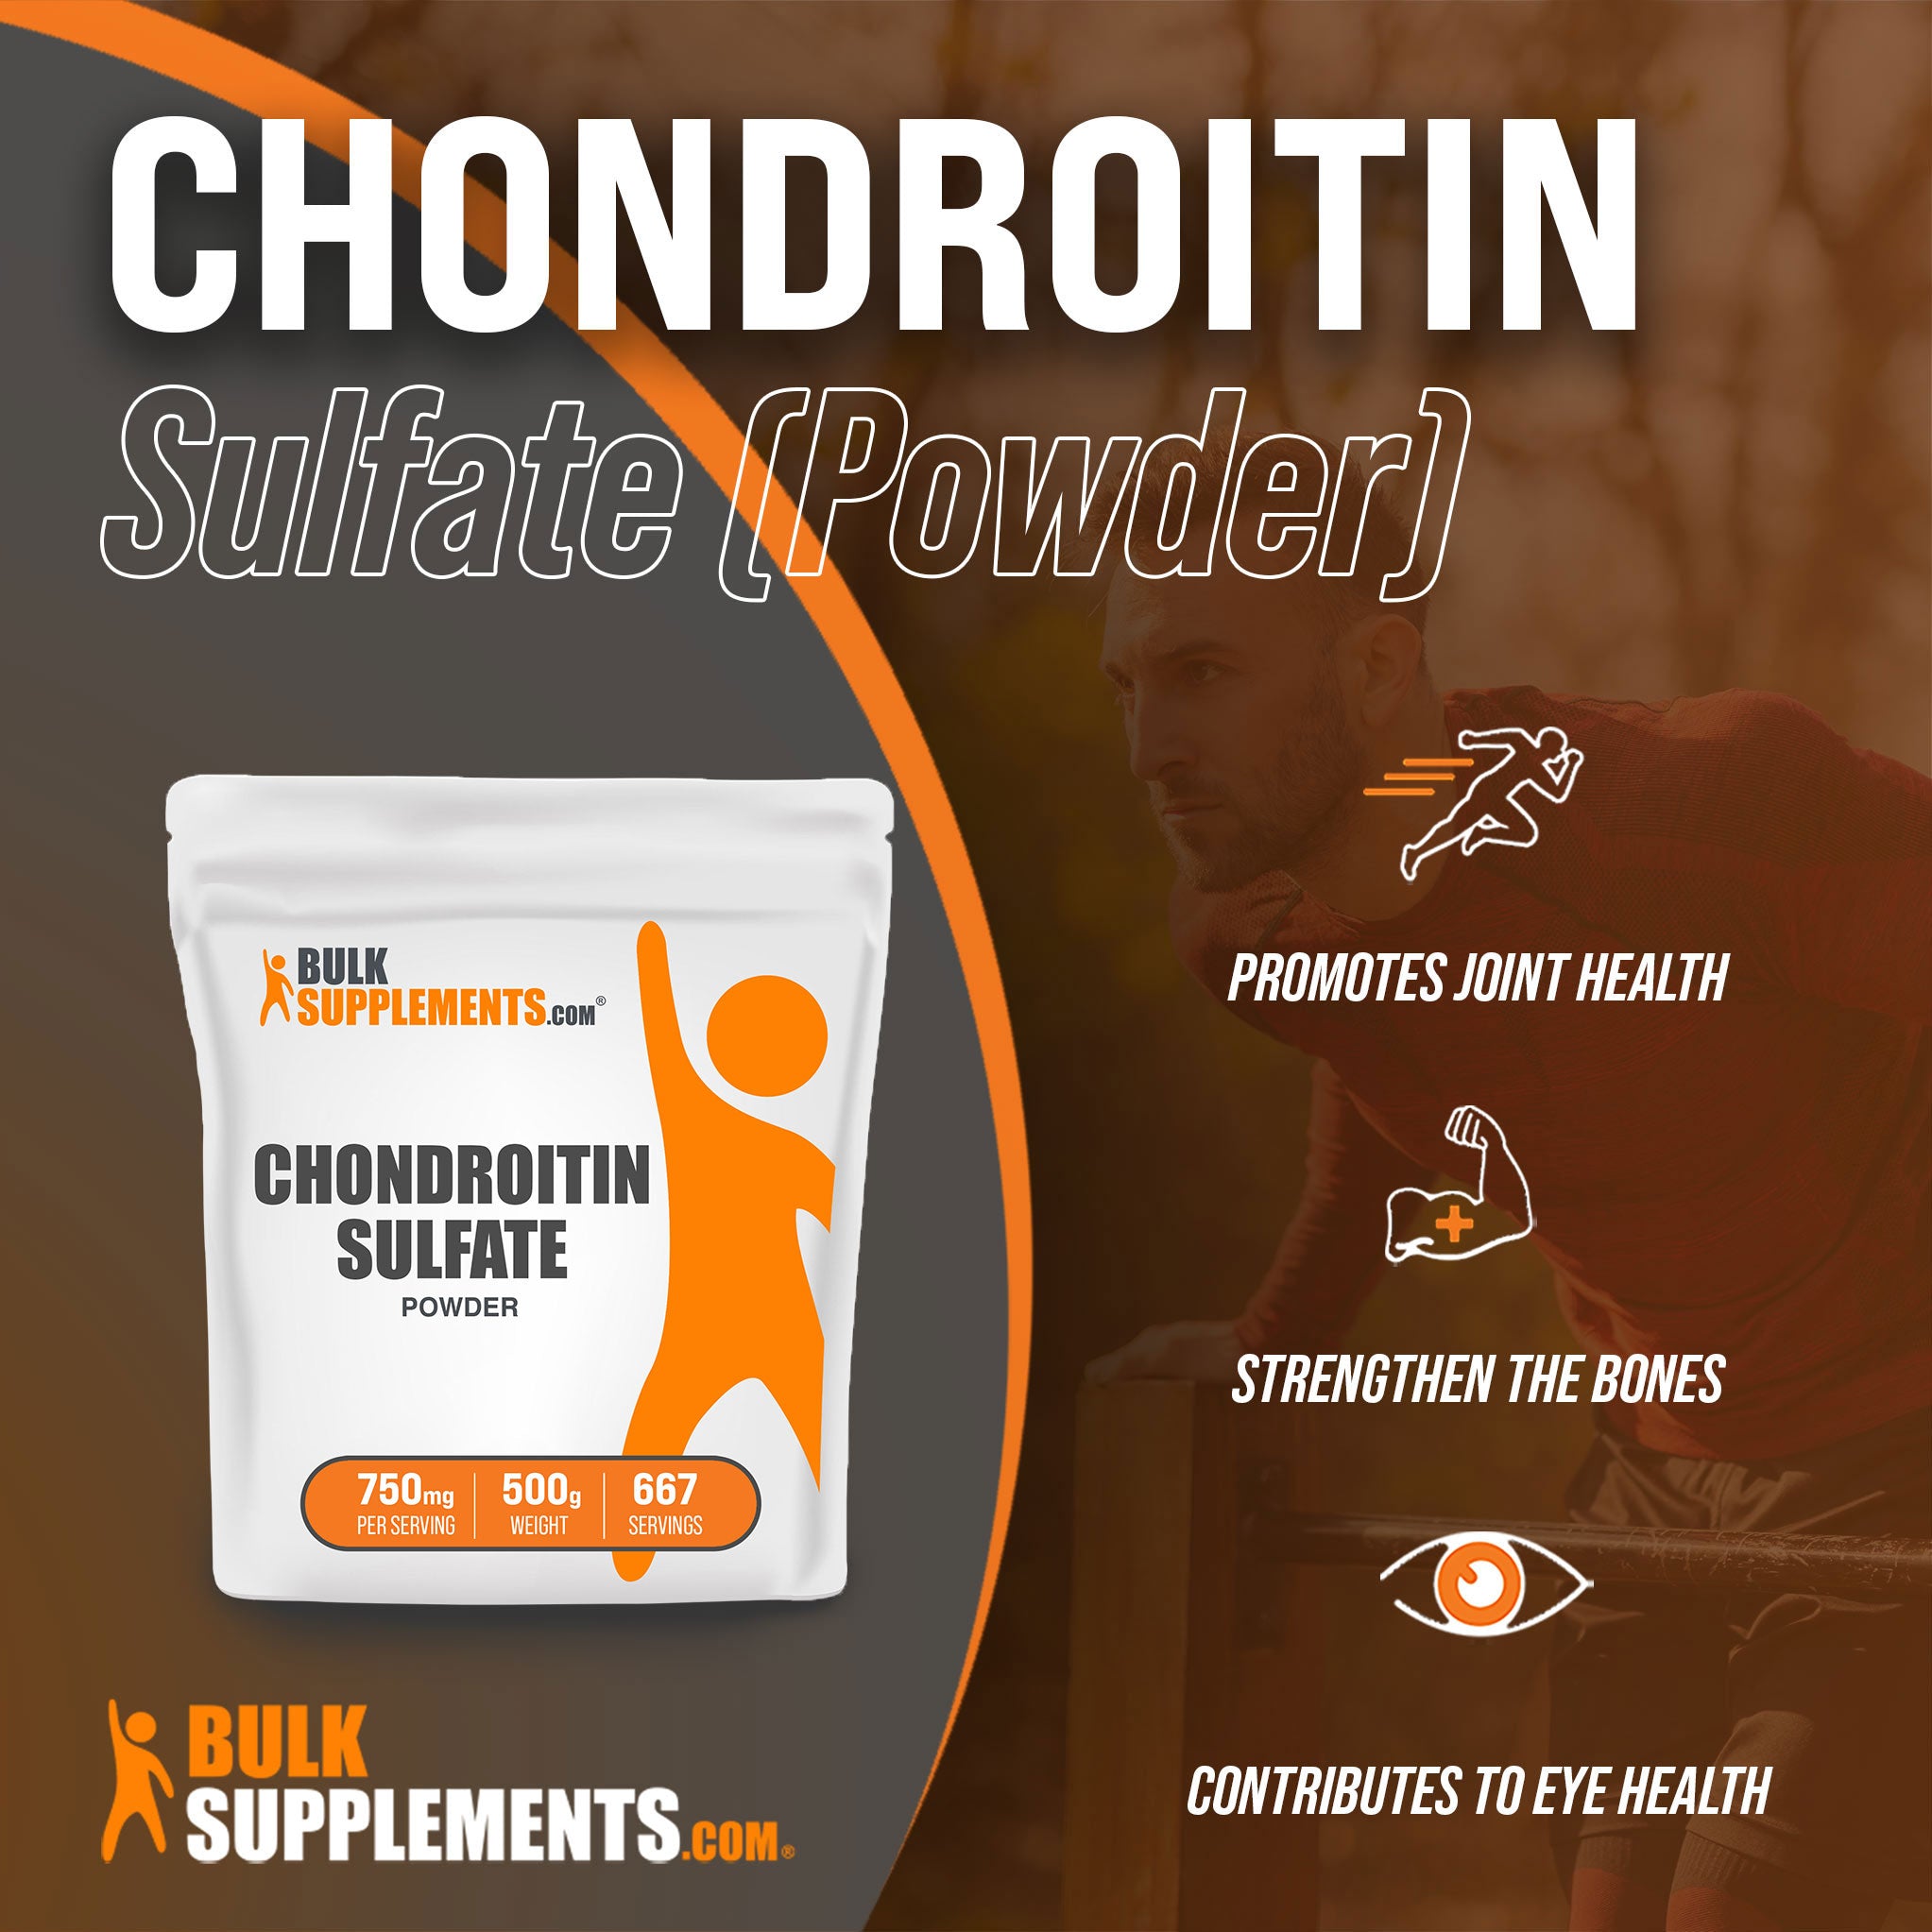 Benefits of 500g Chondroitin Sulfate Powder; joint support supplement, strengthen the bones, contributes to eye health